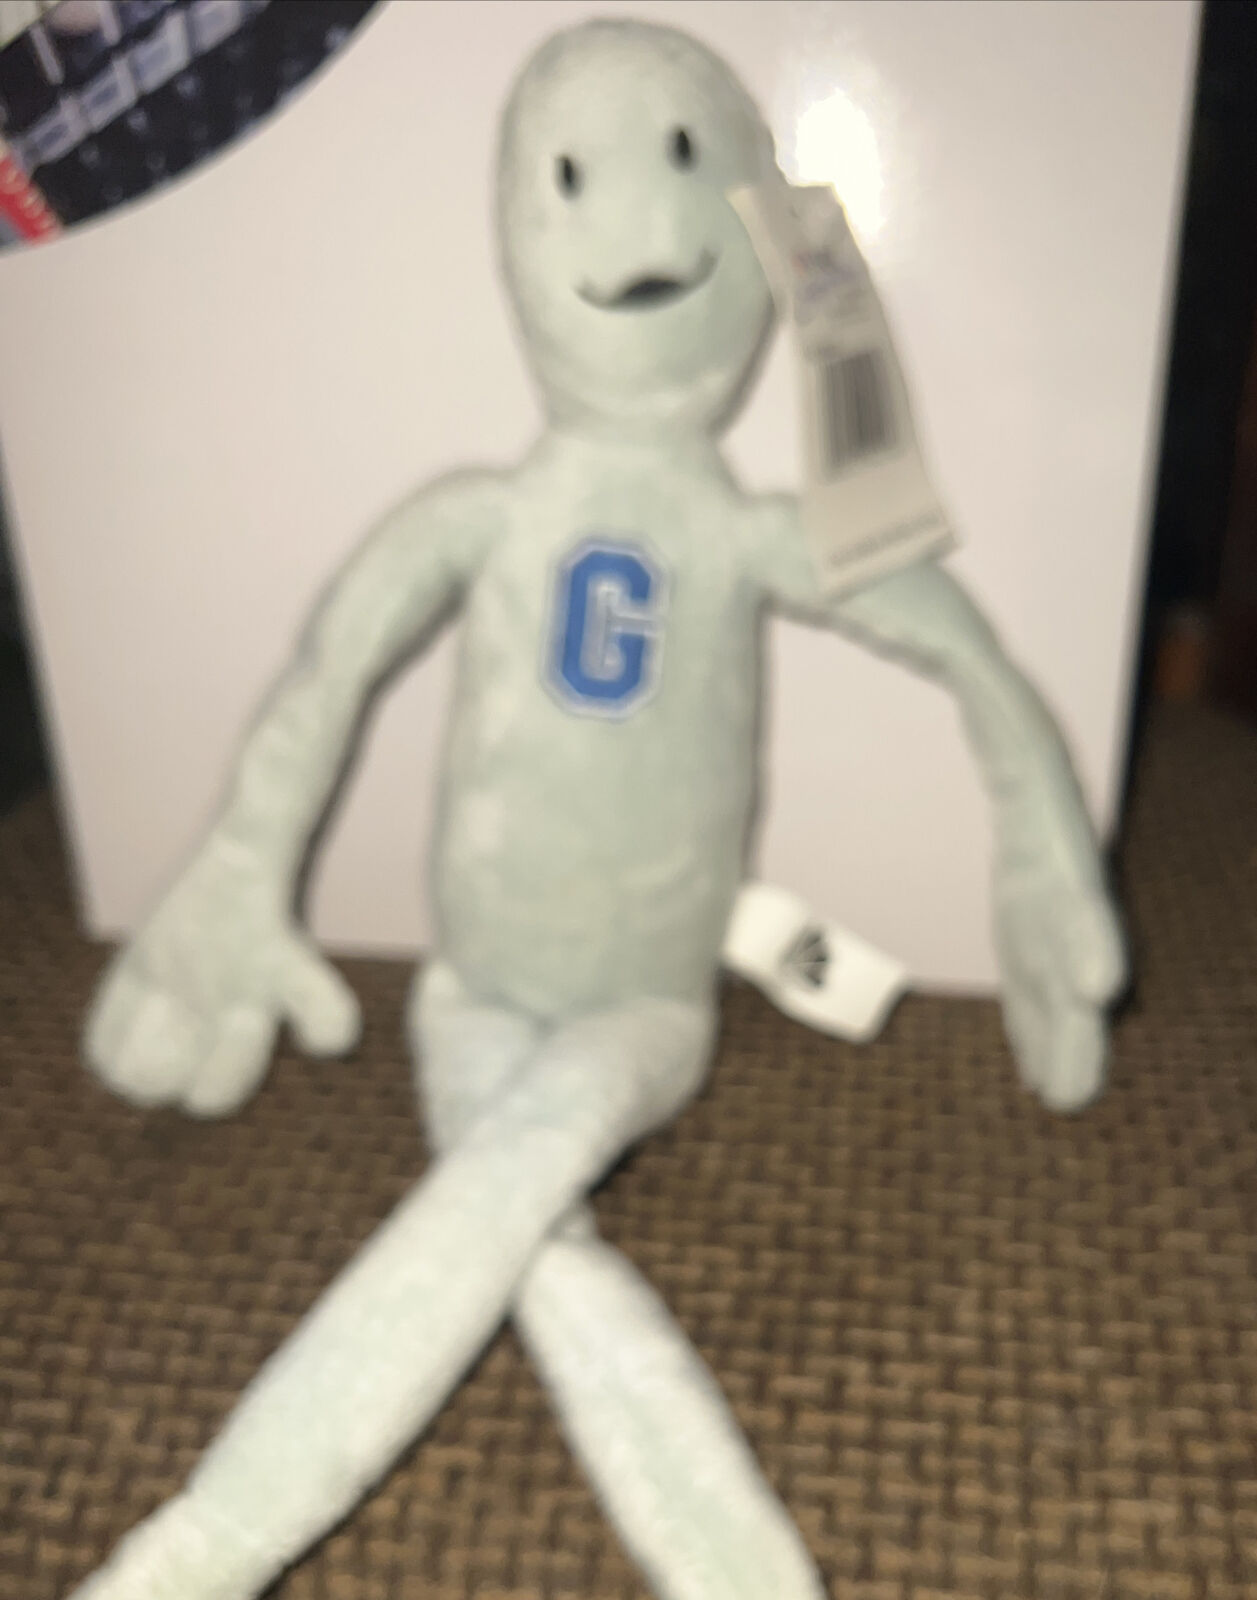 Rare NBC Store Community College Human Being doll Plush With Tag